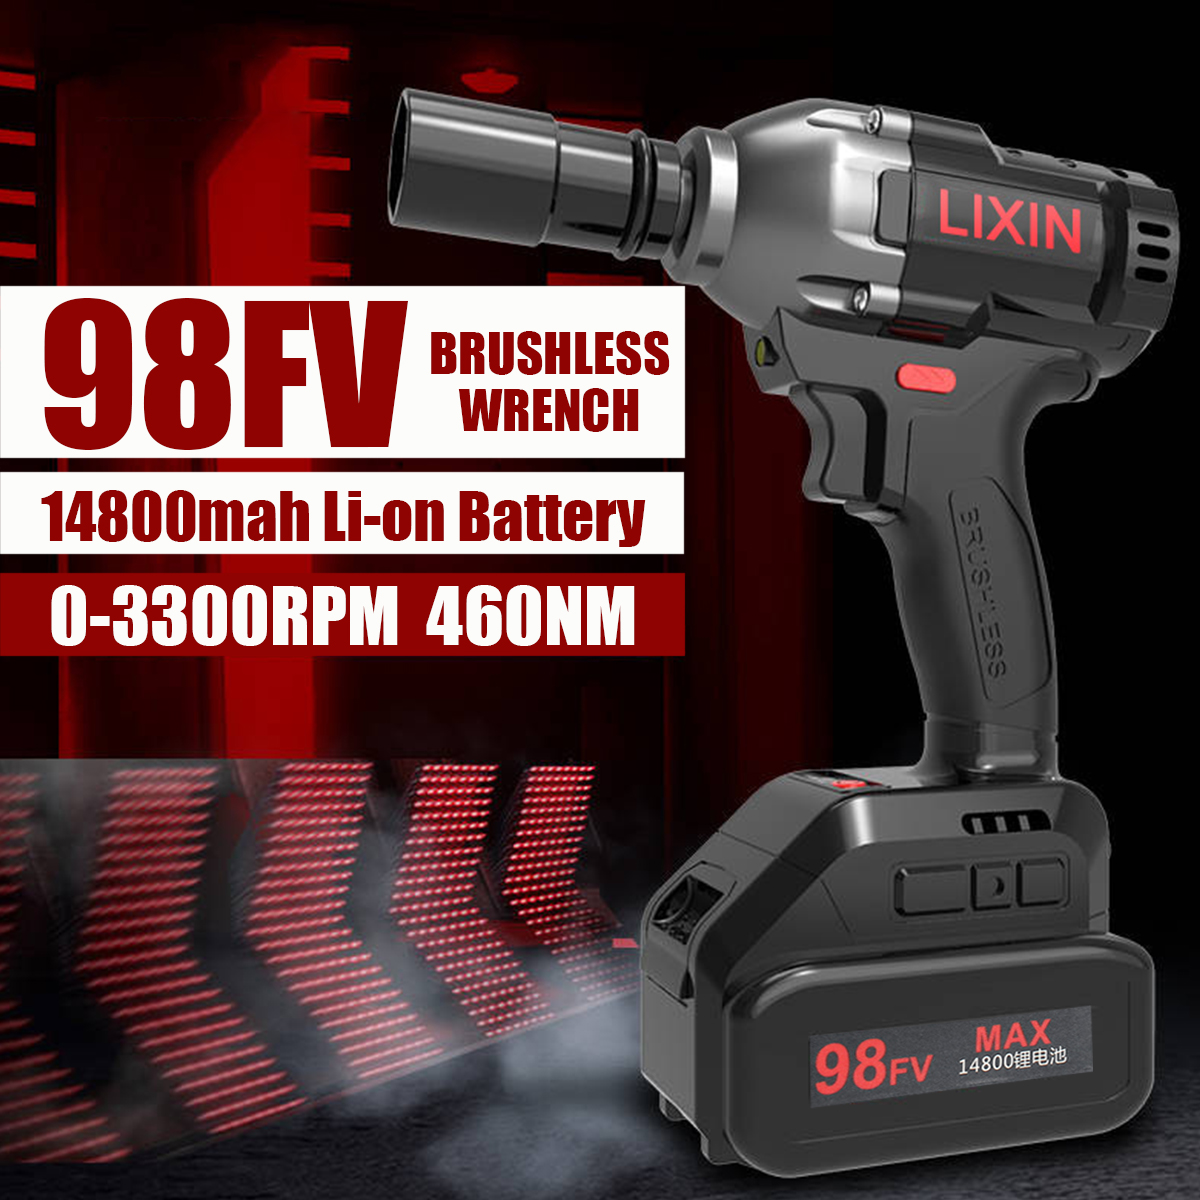 98FV 14800mAh Cordless Brushless Electric Wrench Drill LED Light W/ 1 or 2 Li-on Battery 24